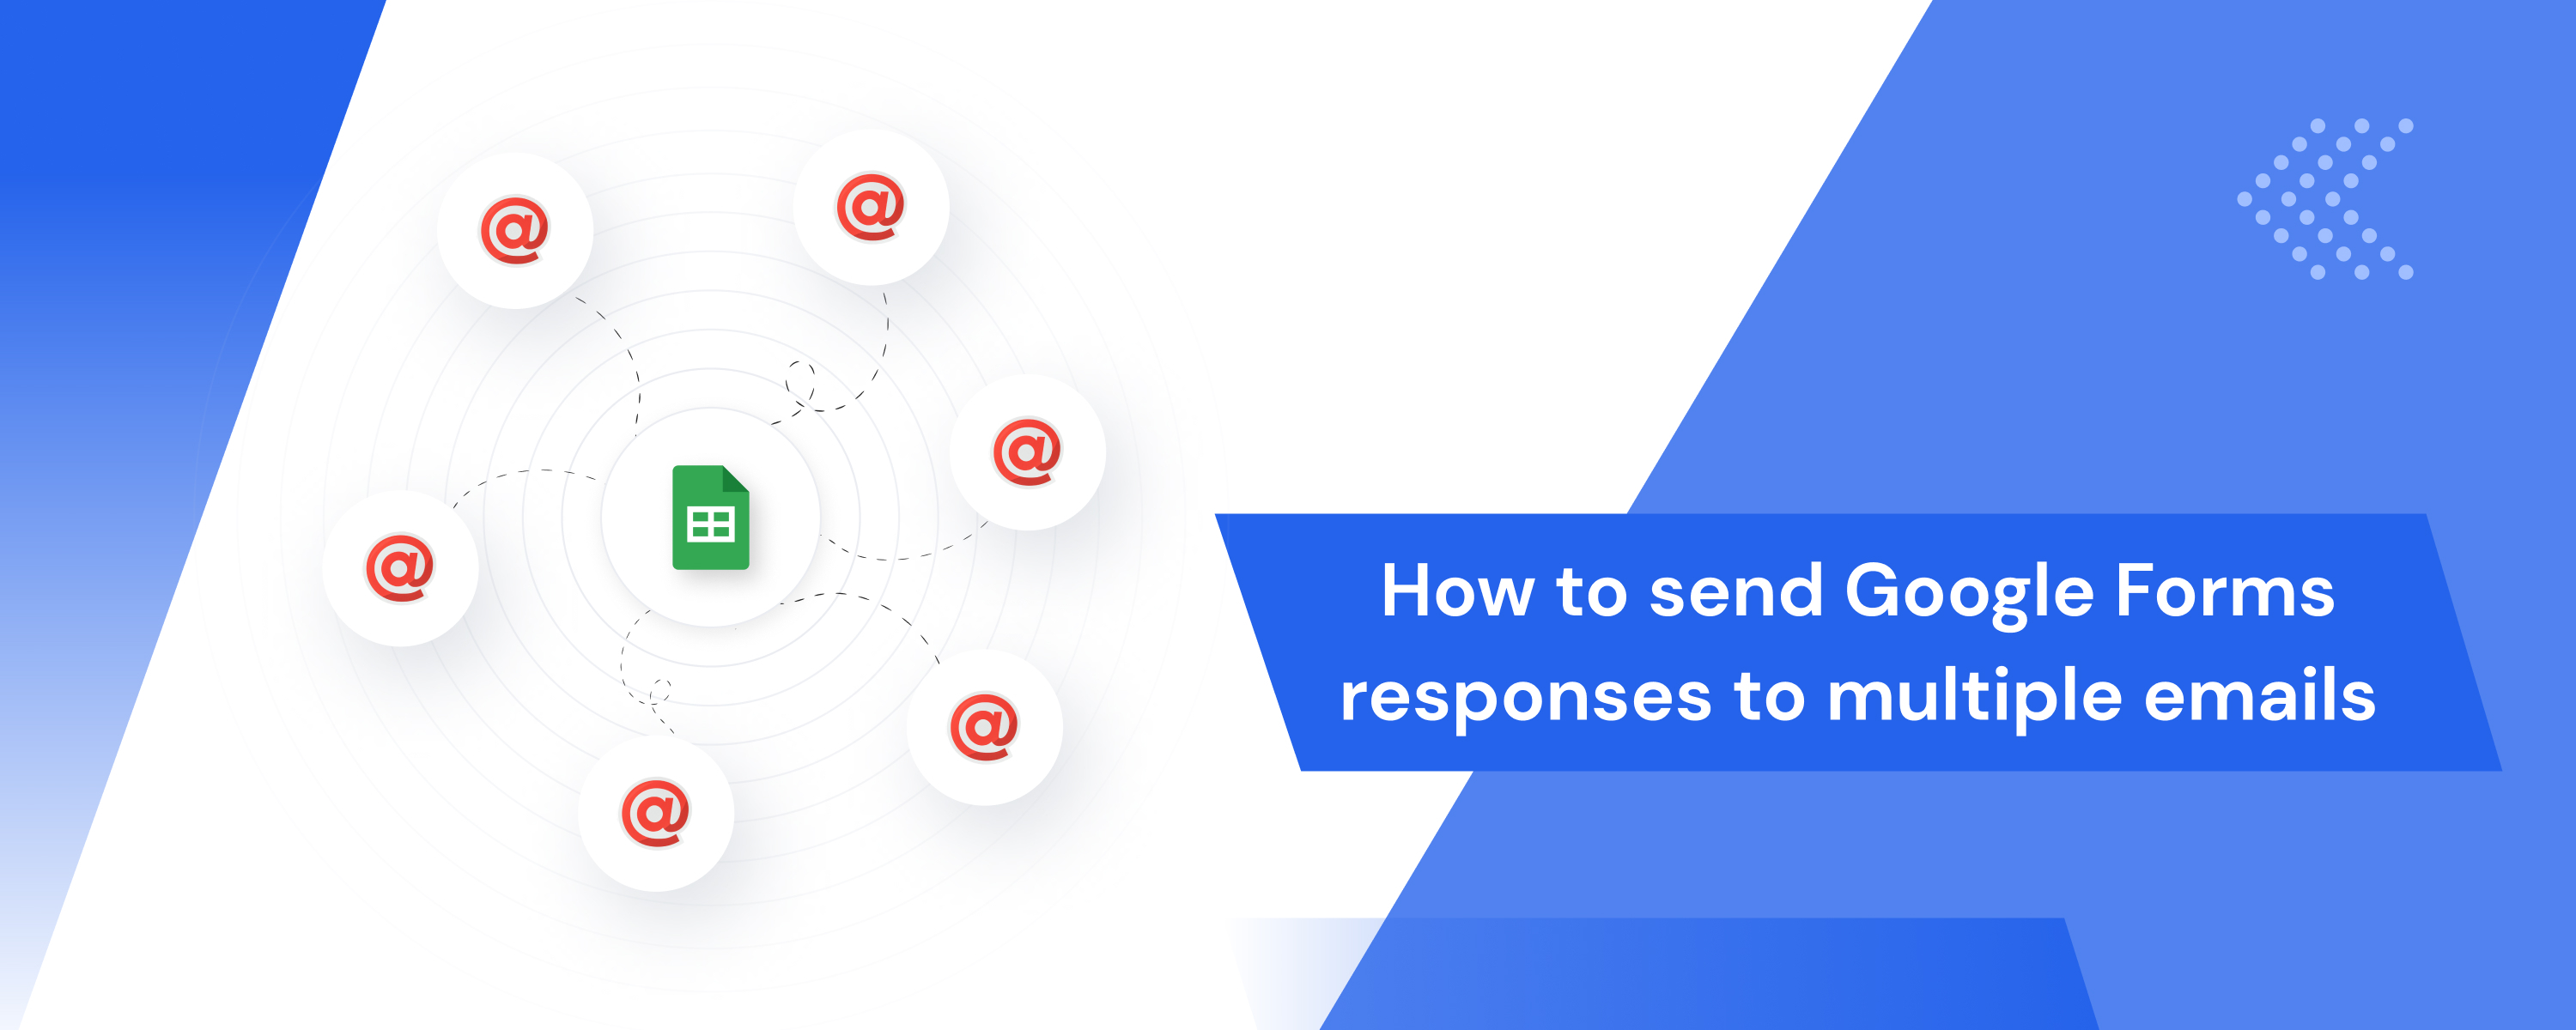 How to send Google Forms responses to multiple email addresses? Using Google Sheets, Add-ons, and...